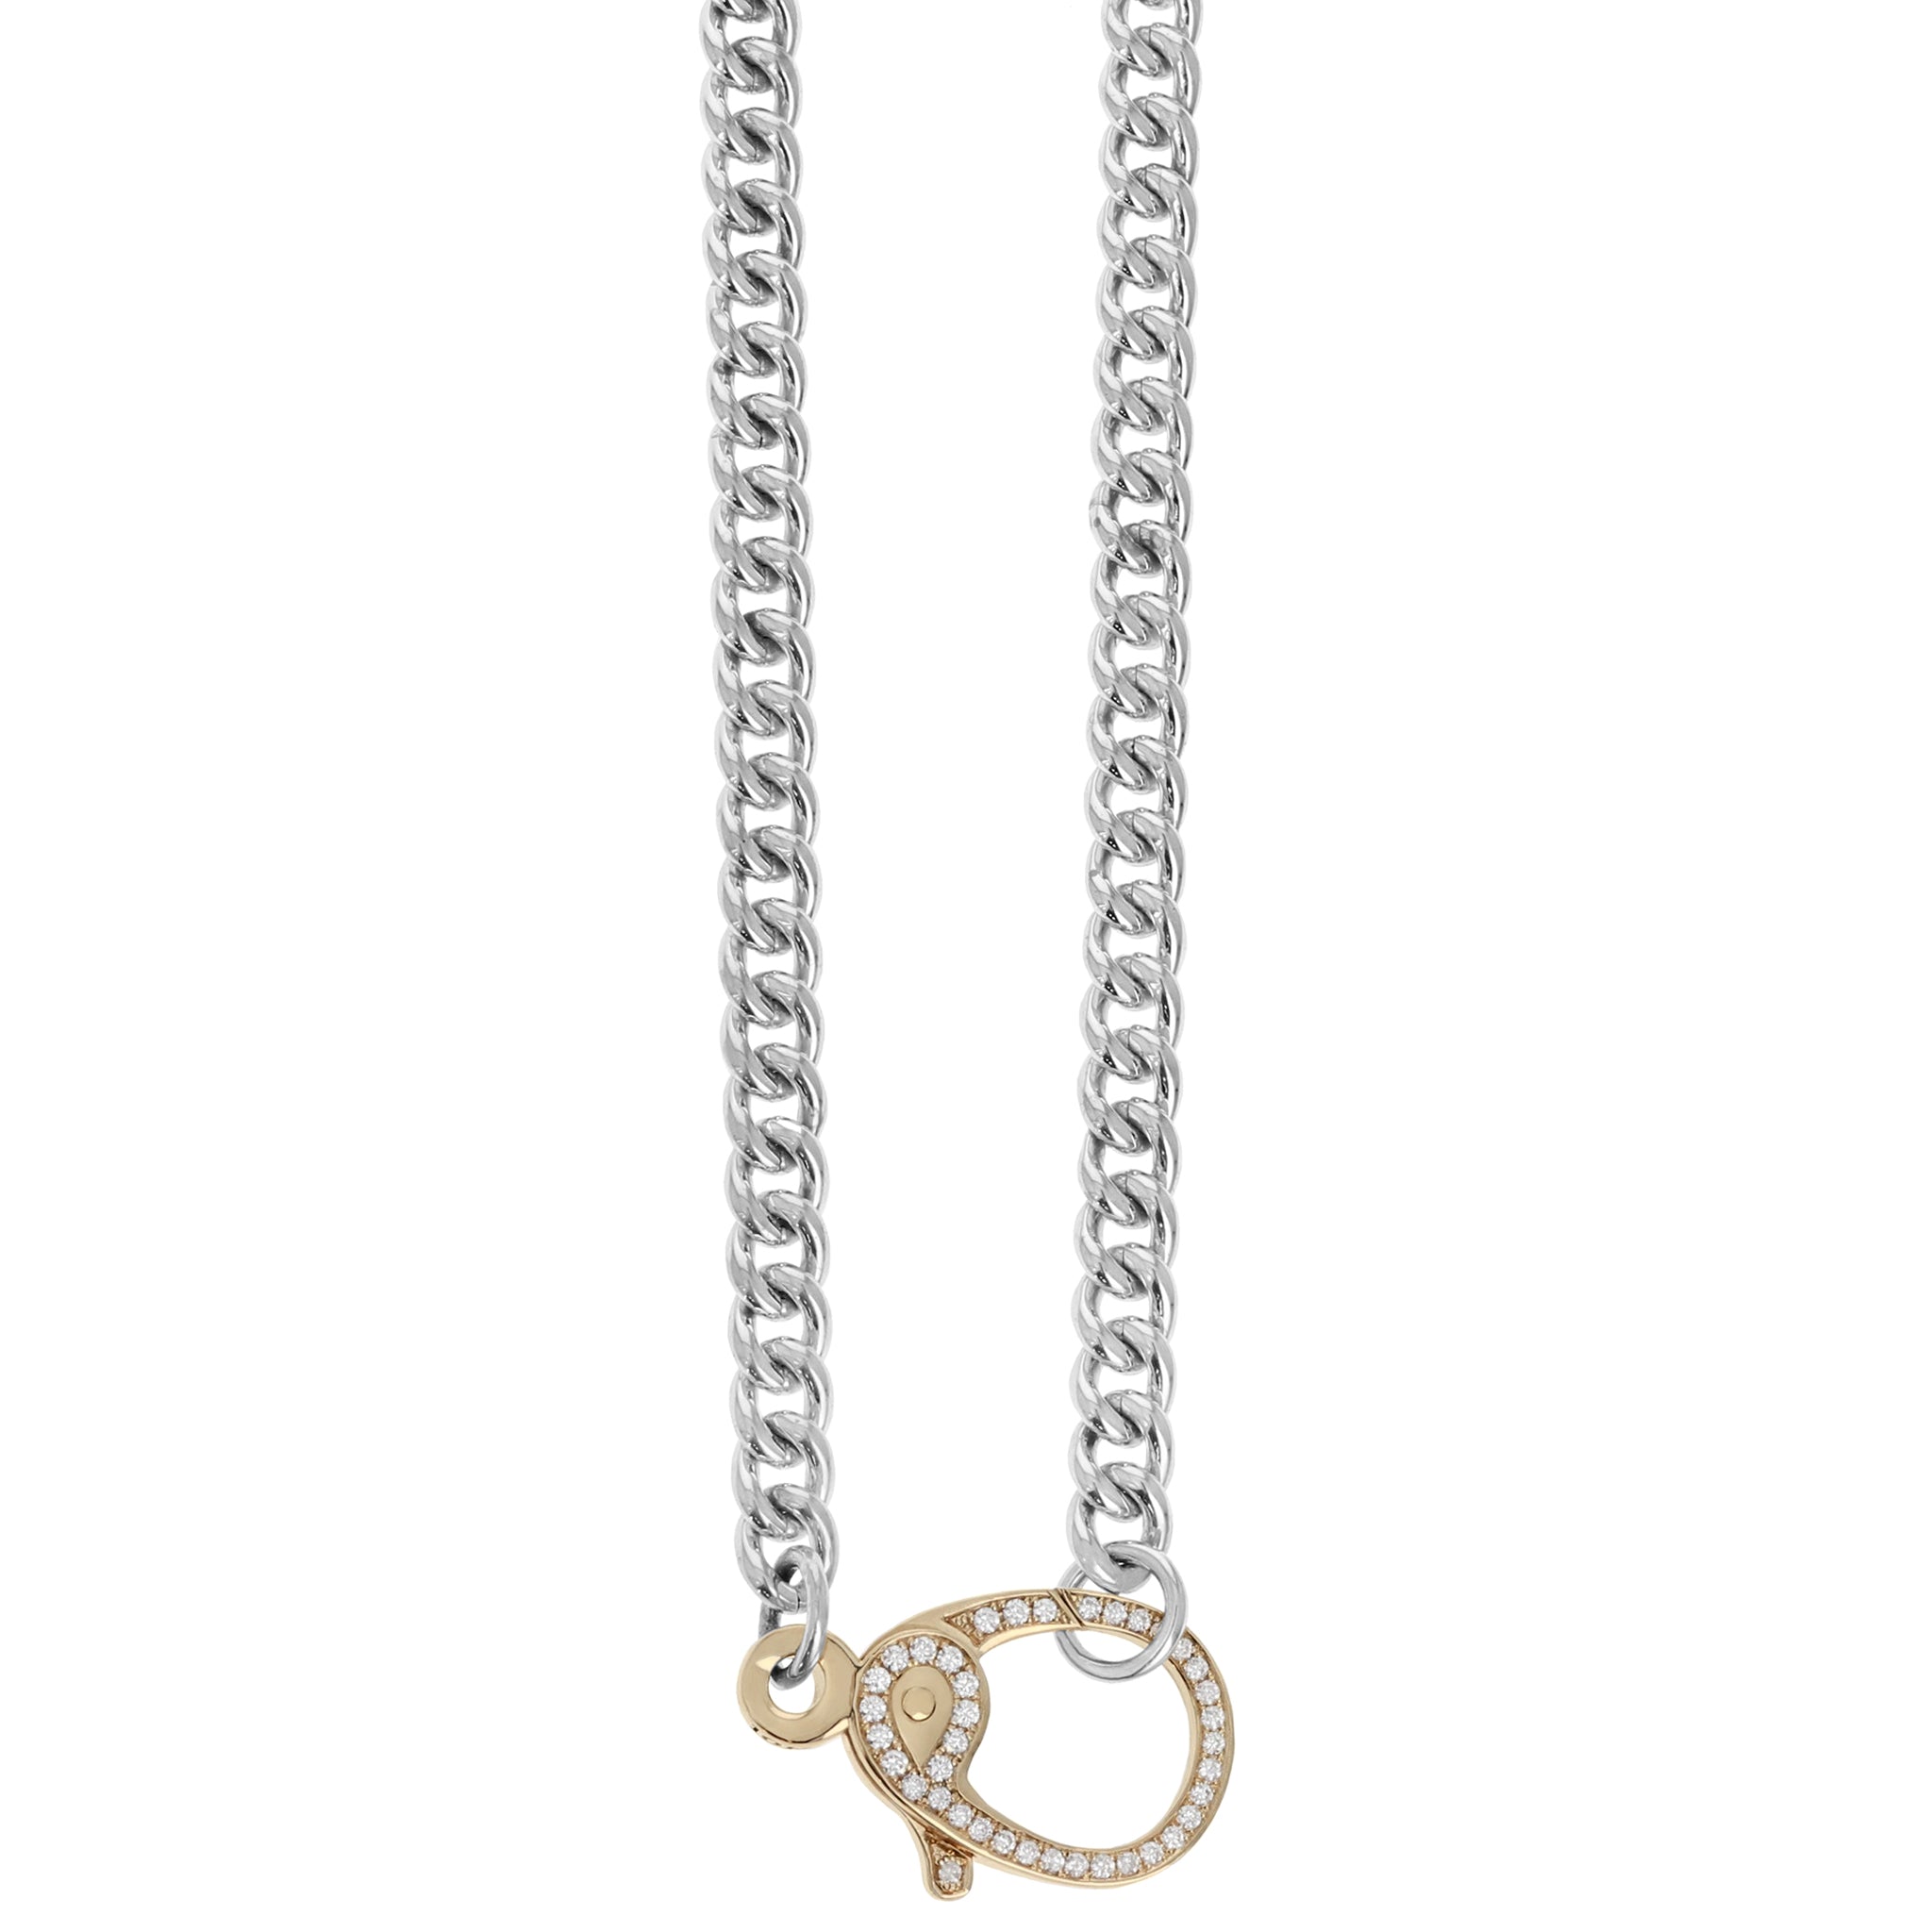 Large Curb Chain with Large 10K Gold and Double Sided Pave Diamond Lobster Clasp